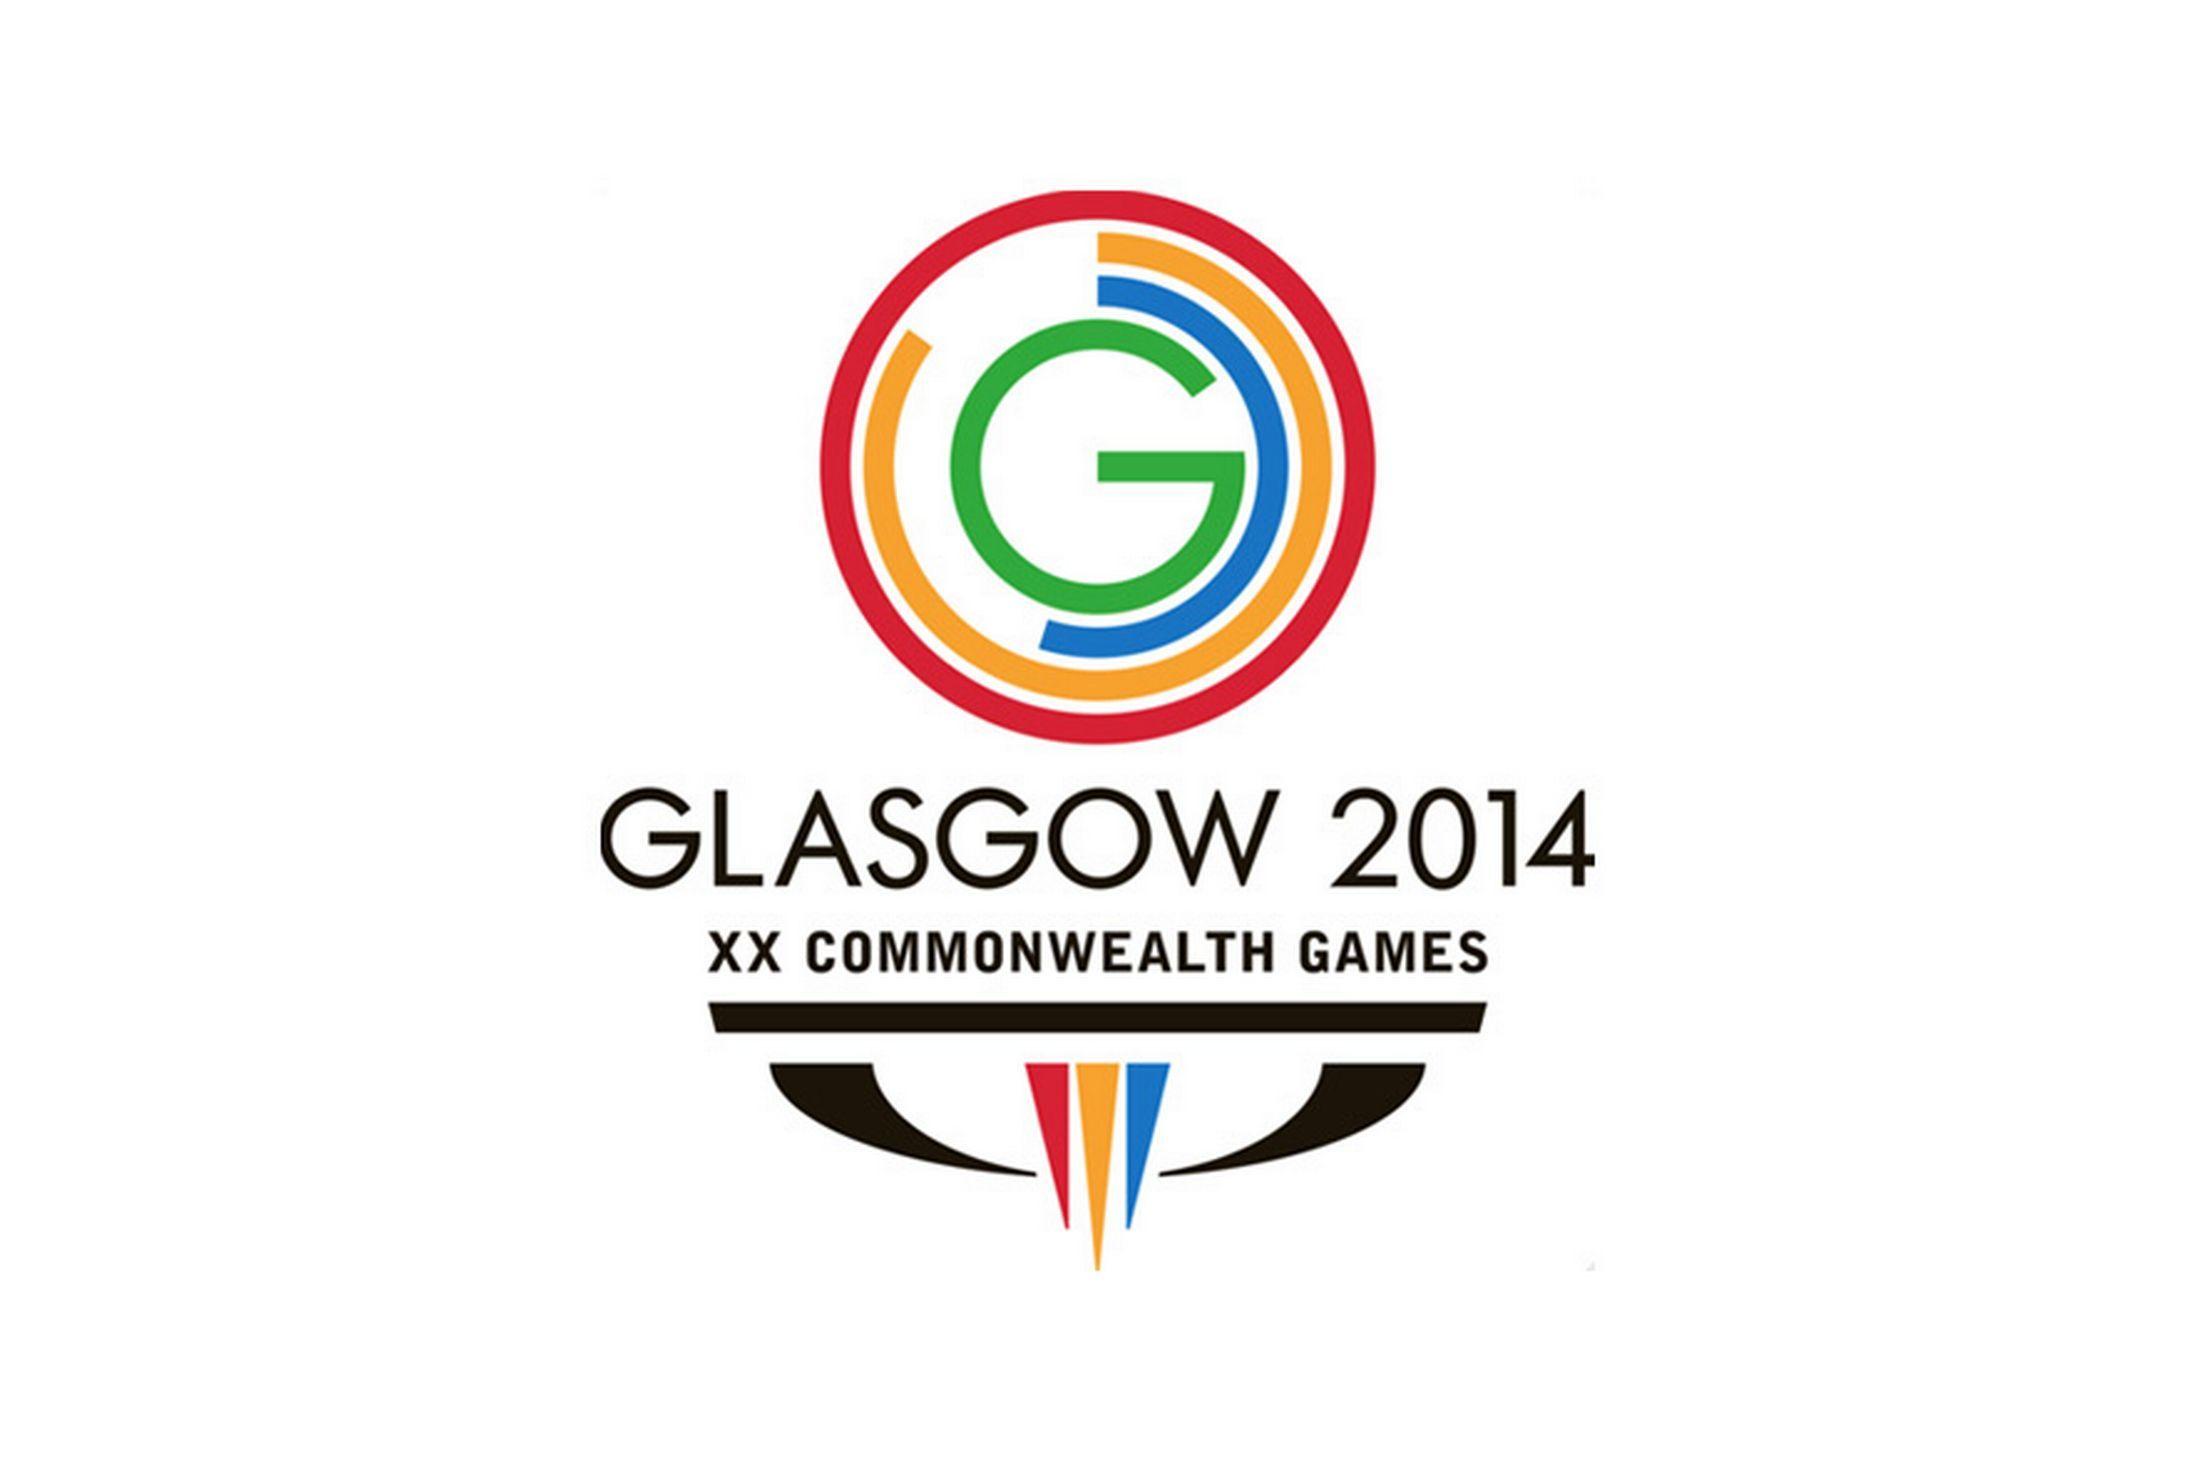 Commonwealth Games 2014 Logo Wallpaper, Commonwealth Games 2014